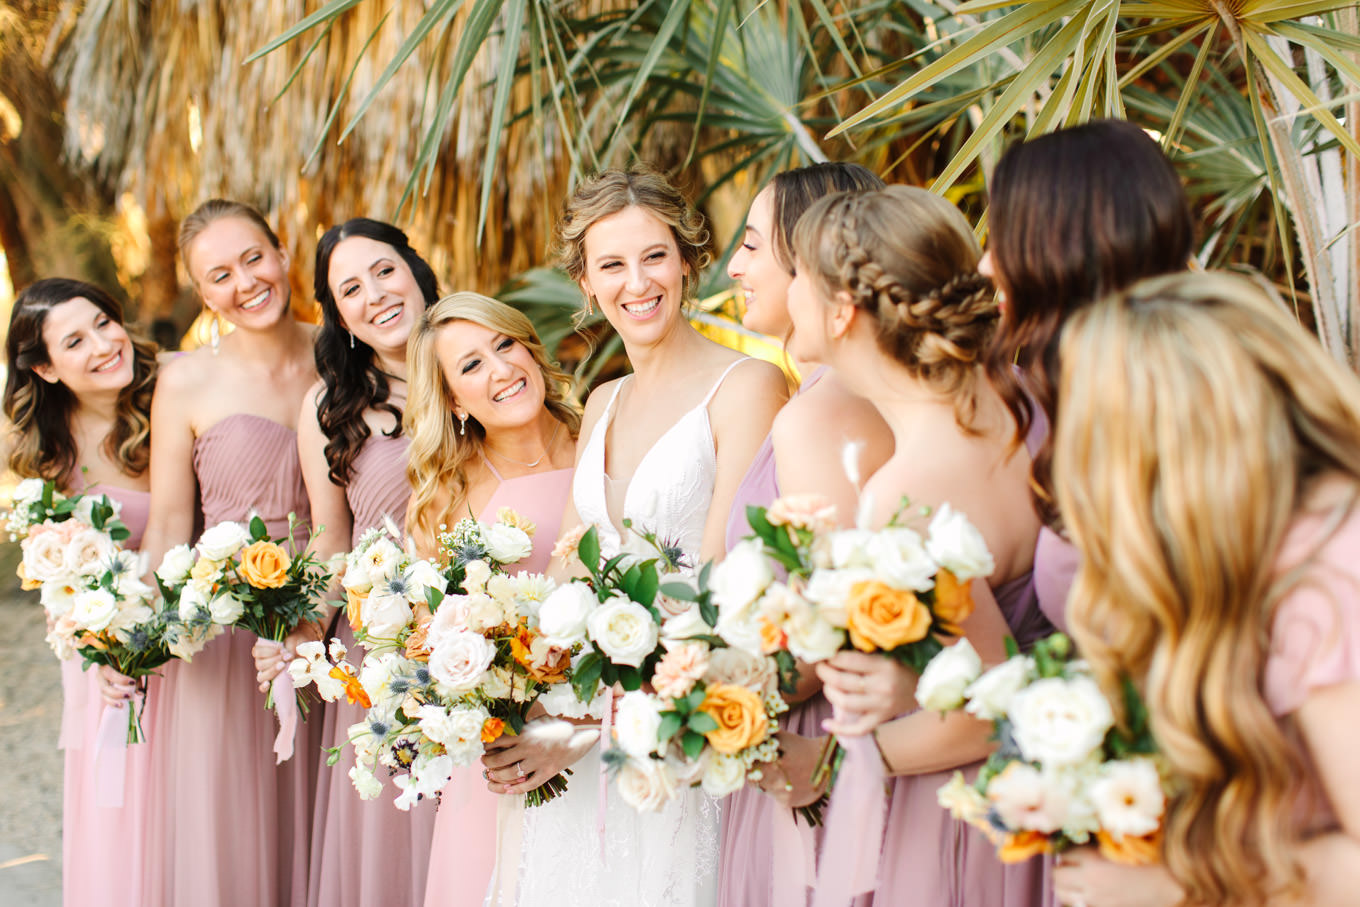 Bridesmaids in mismatched blush and mauve dresses | Living Desert Zoo & Gardens wedding with unique details | Elevated and colorful wedding photography for fun-loving couples in Southern California |  #PalmSprings #palmspringsphotographer #gardenwedding #palmspringswedding  Source: Mary Costa Photography | Los Angeles wedding photographer 